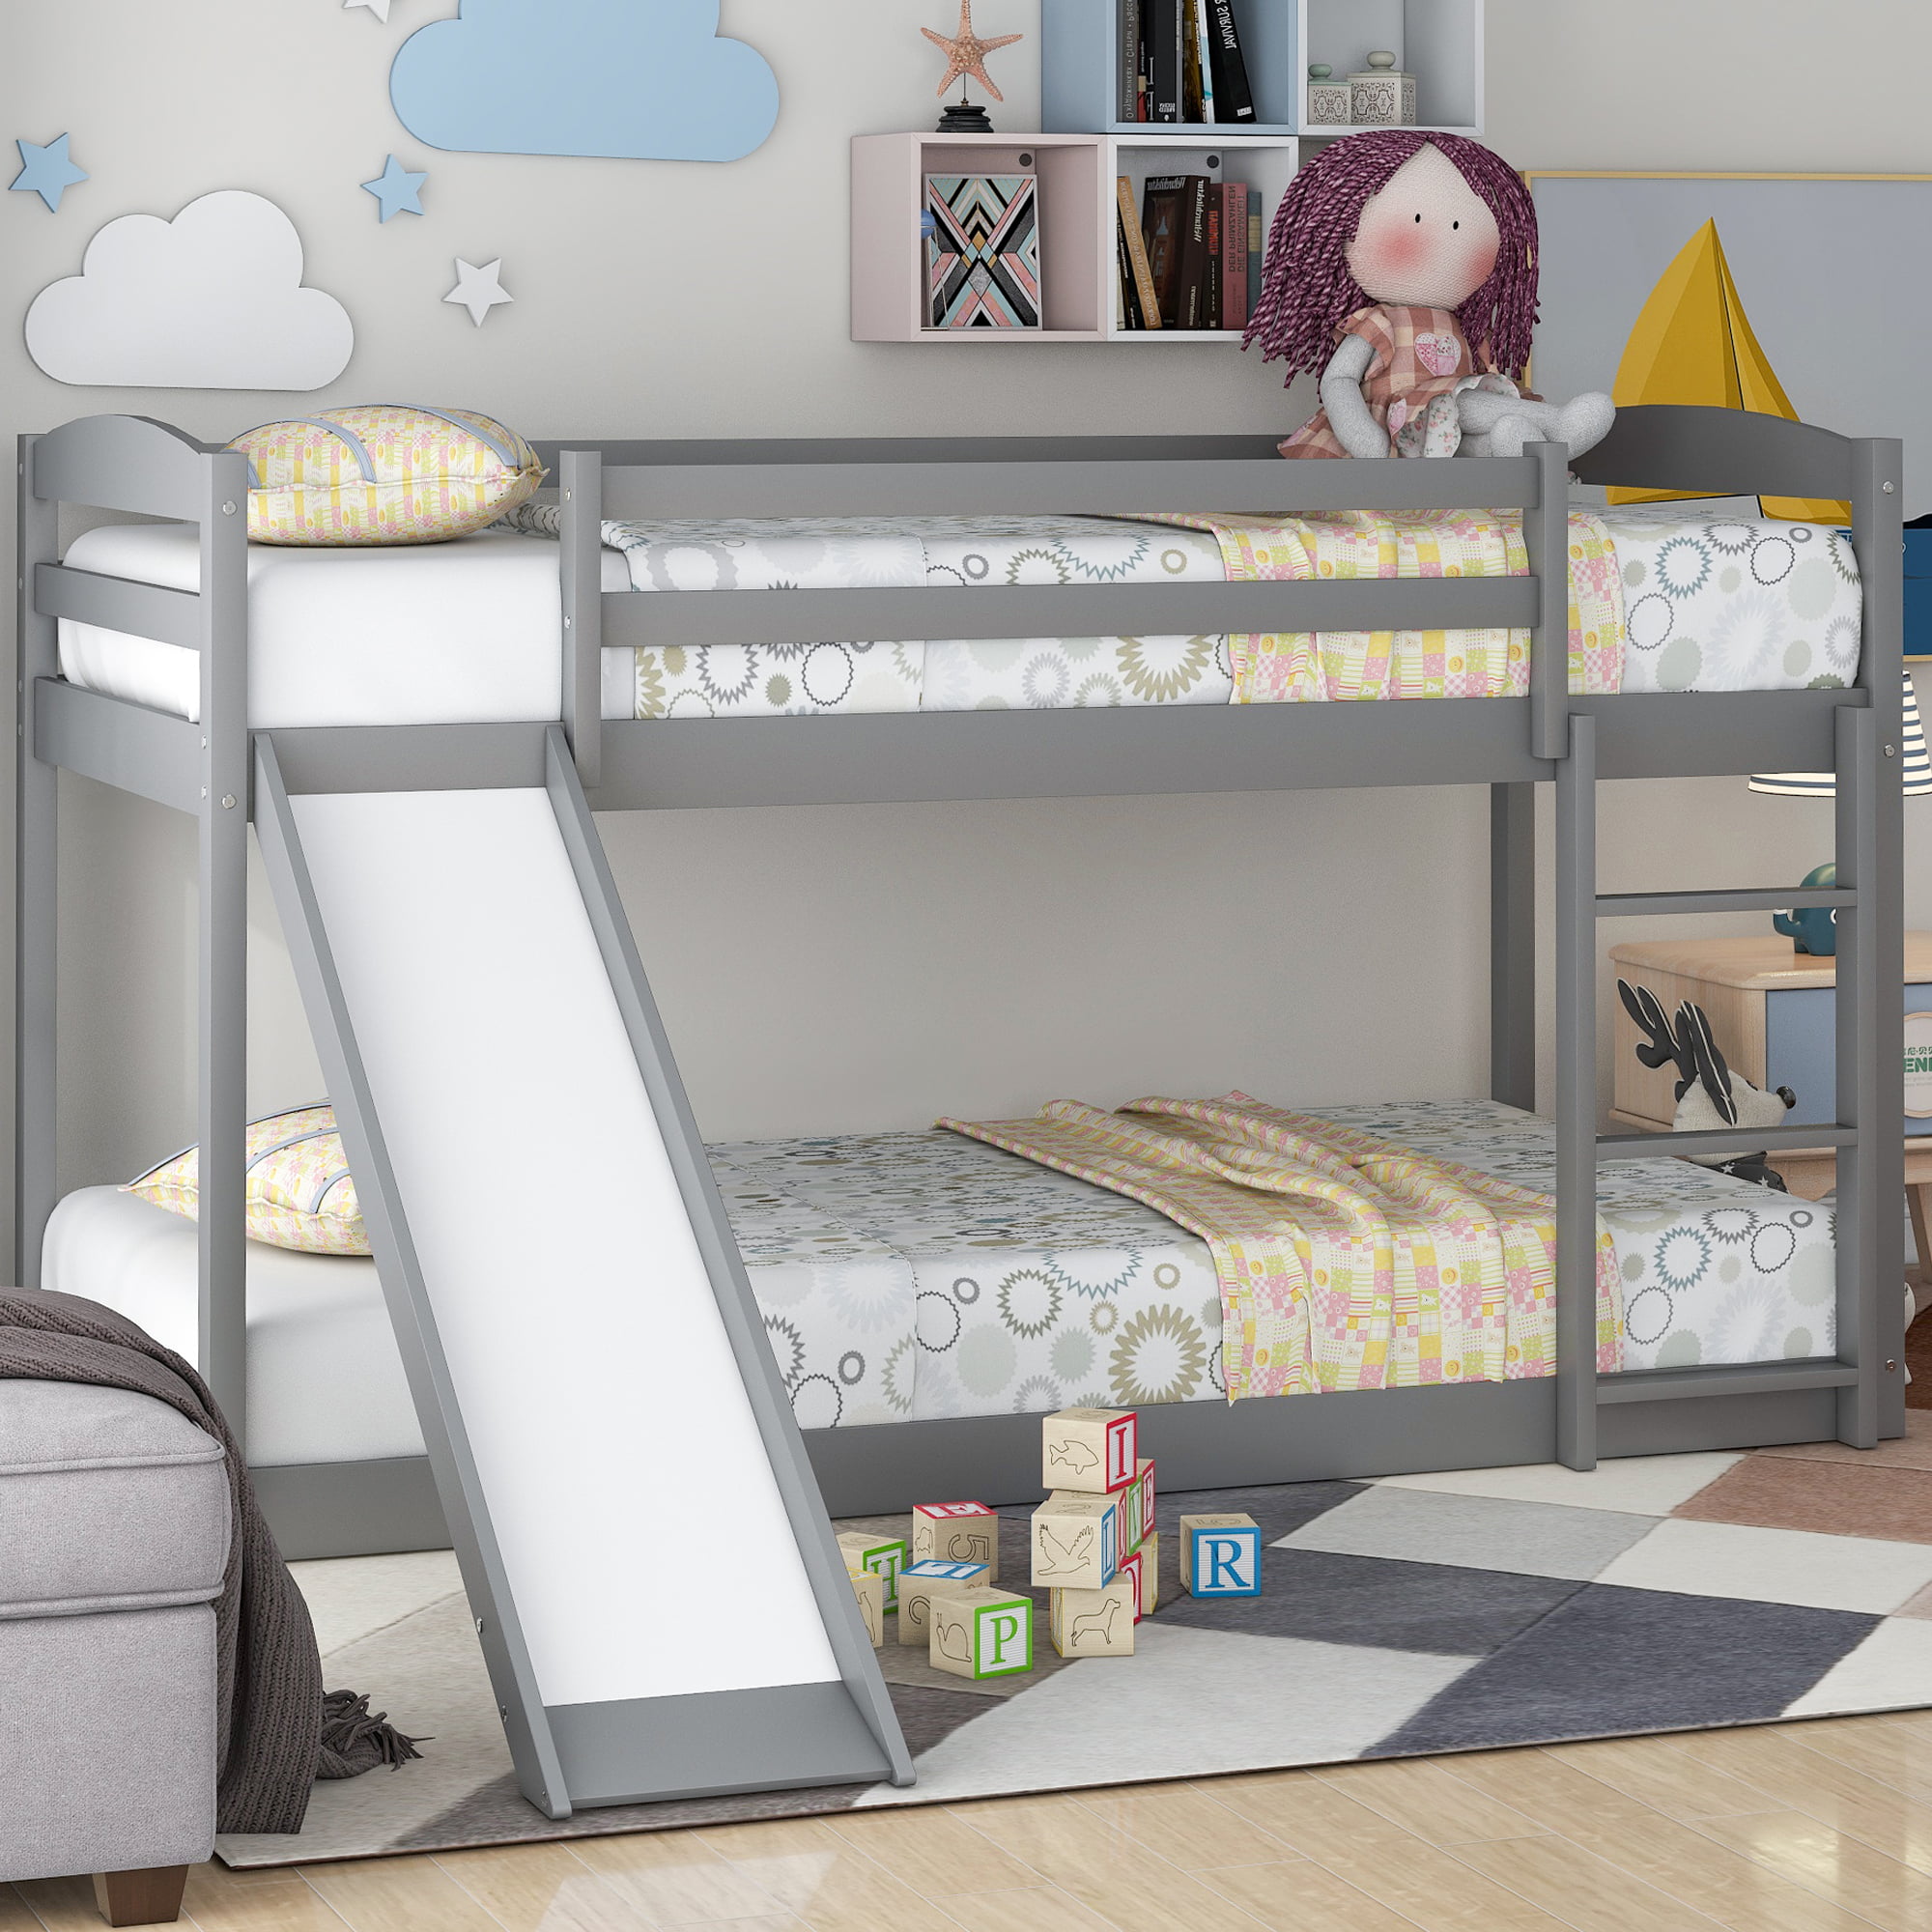 Bunk Bed With Slide Kids Beds, Camp Bunk Bed With Slide